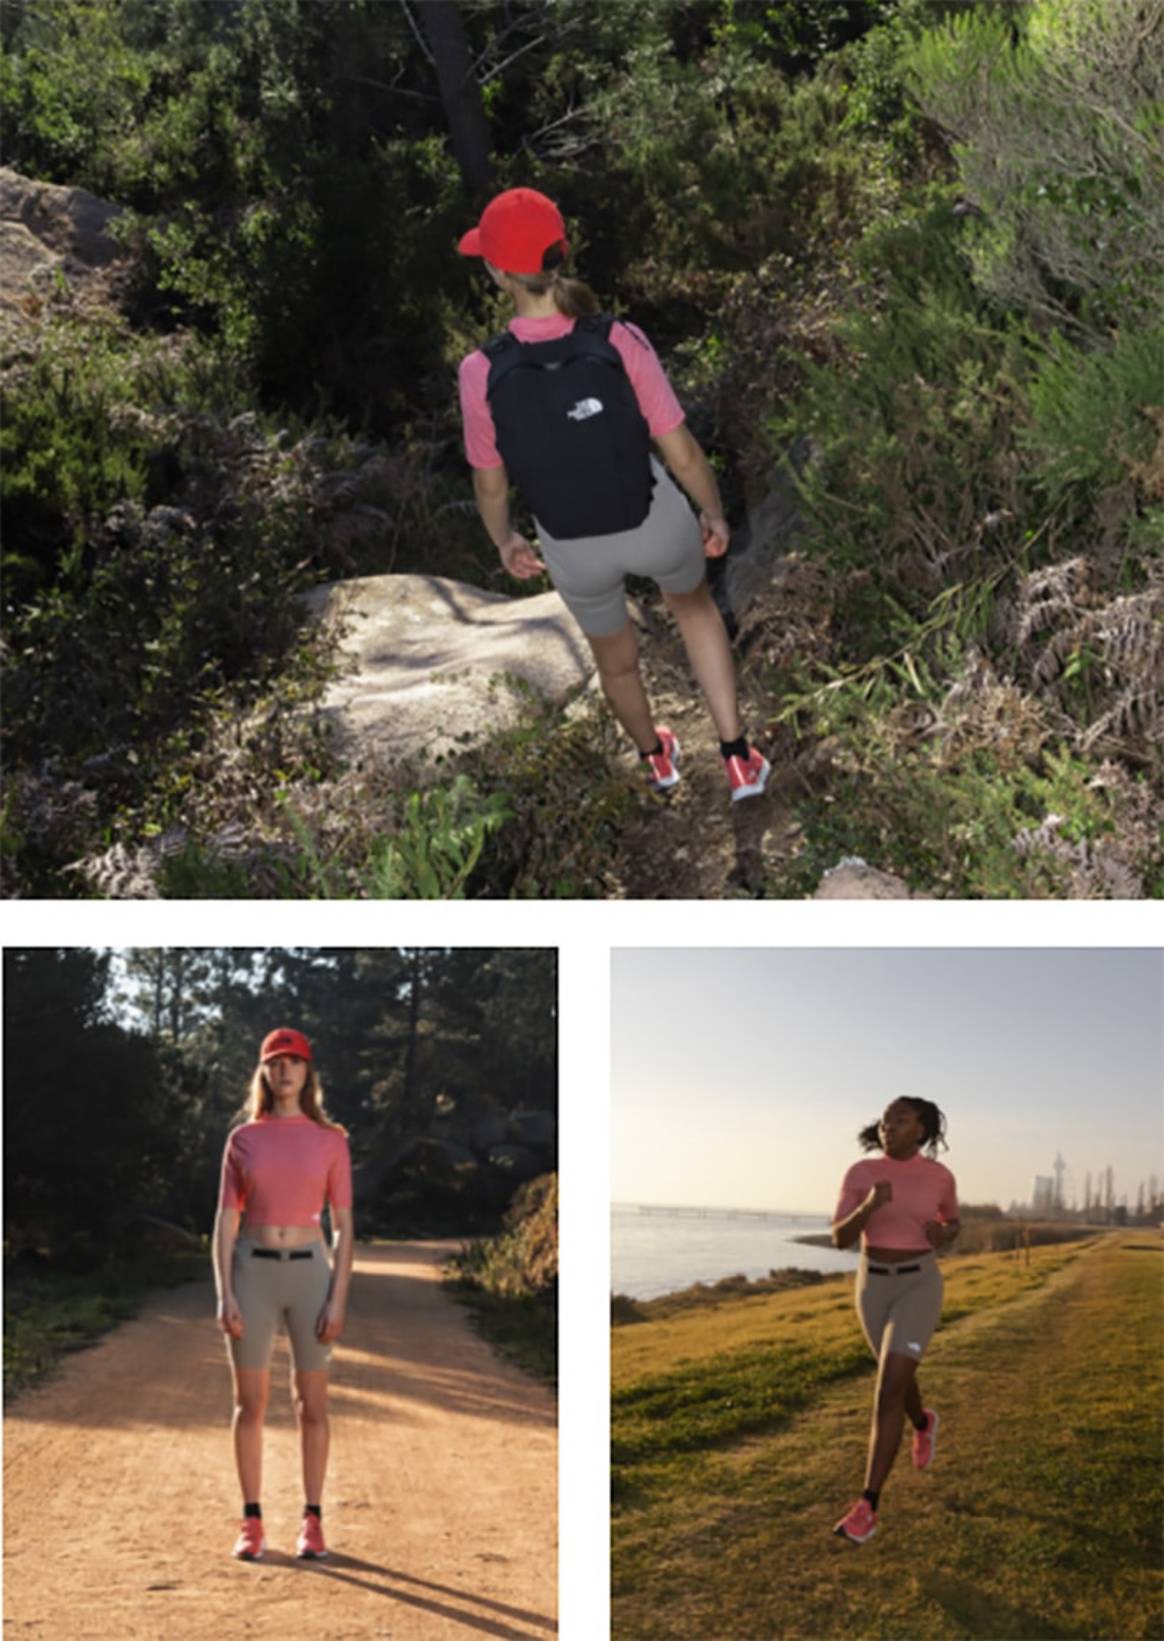 THE NORTH FACE – ACTIVE TRAIL